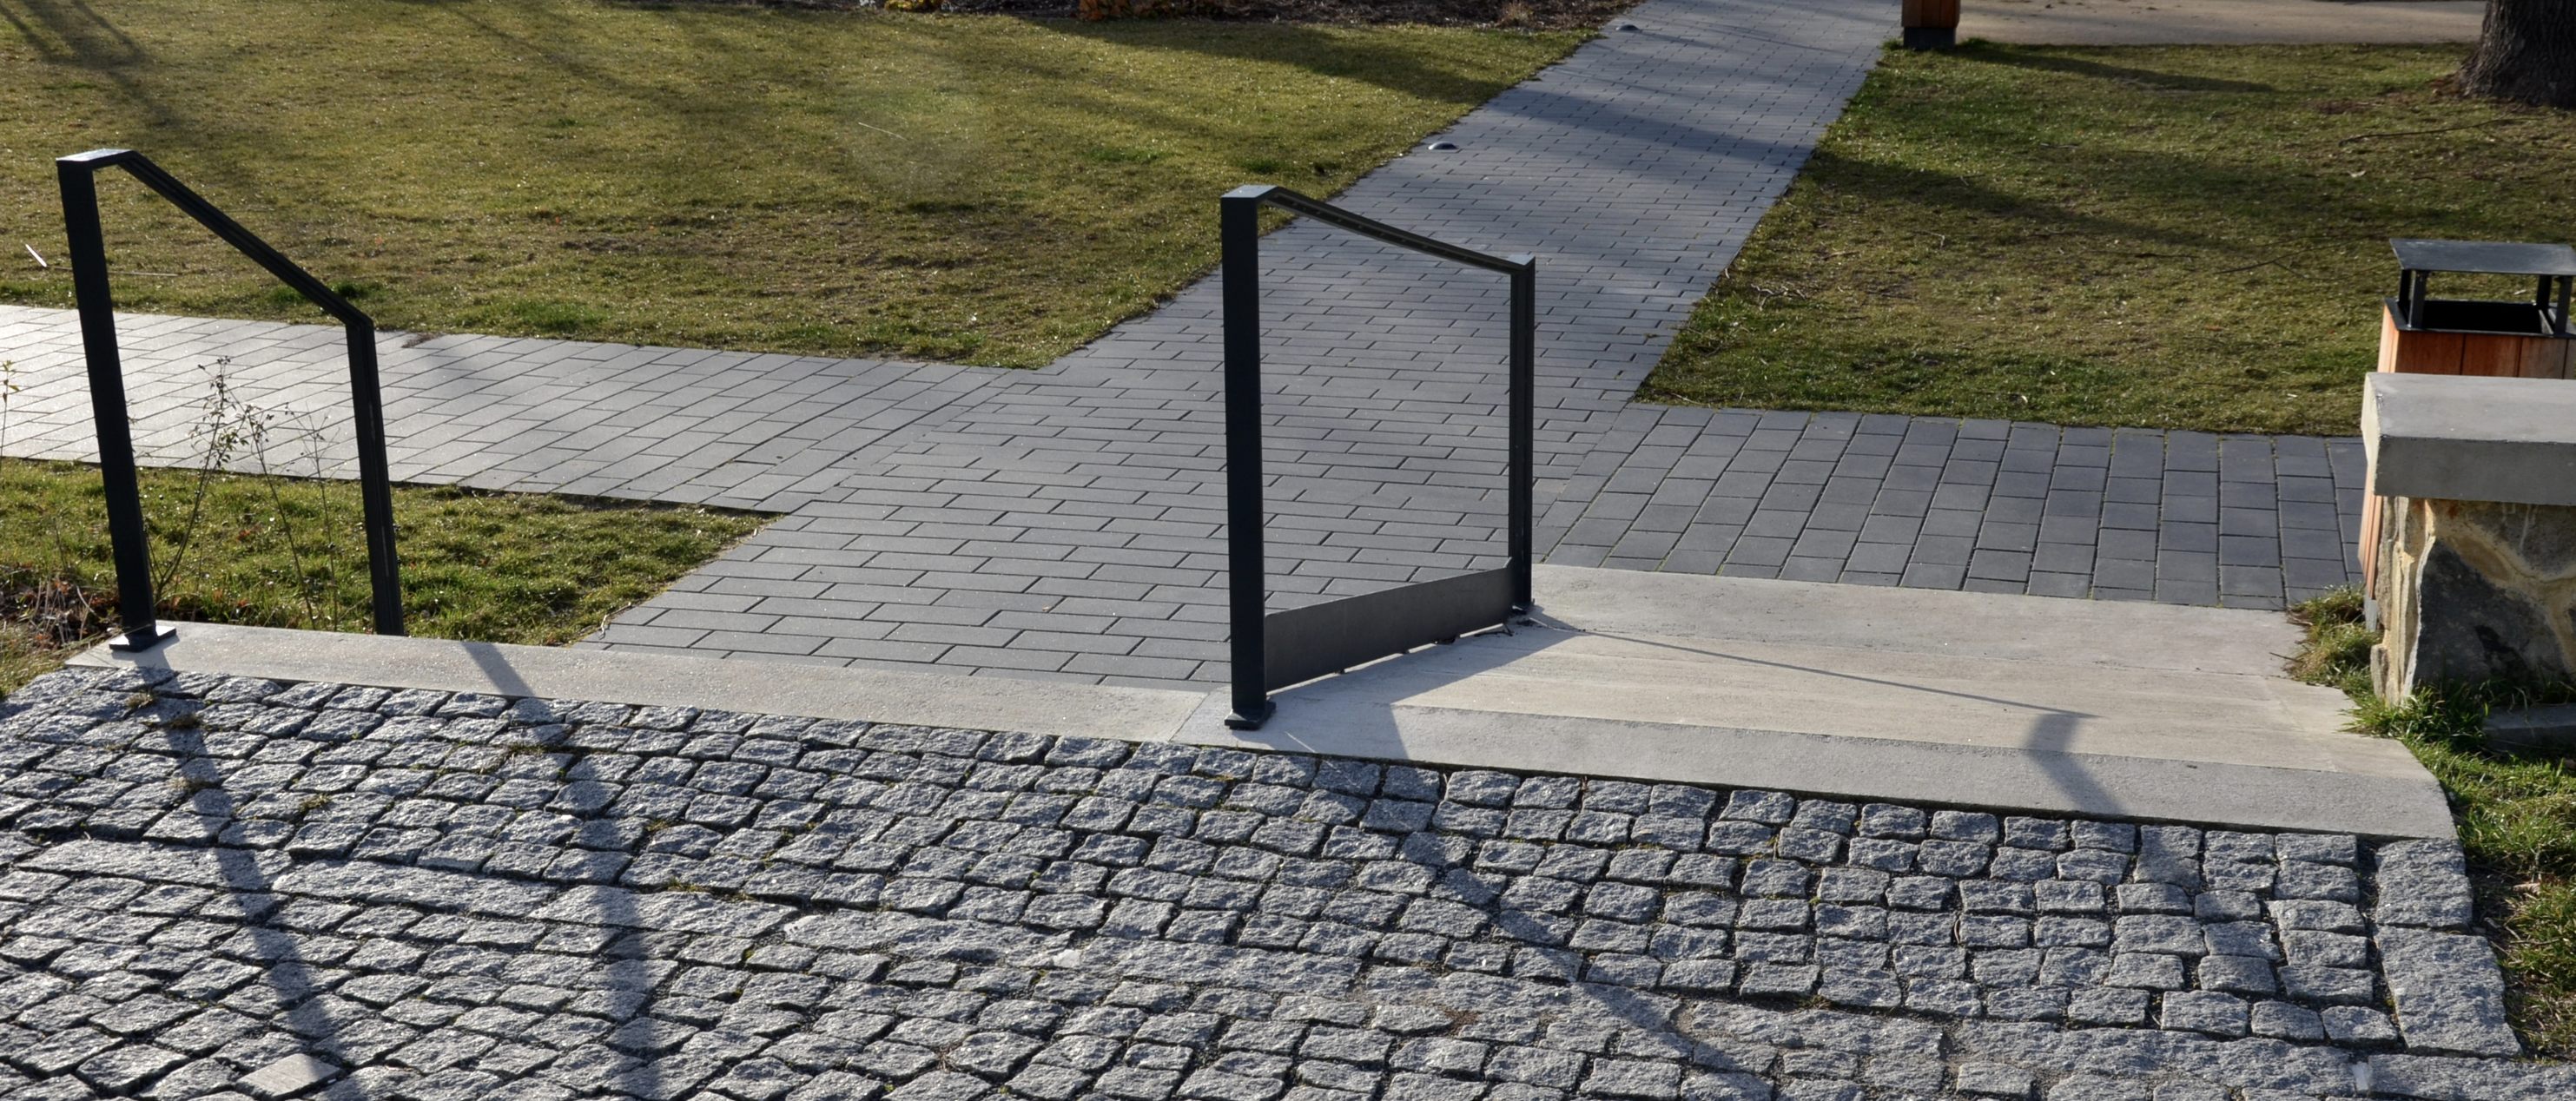 Outdoor Spaces, Wheelchair Users, And Fine Tuning Accessibility Measures